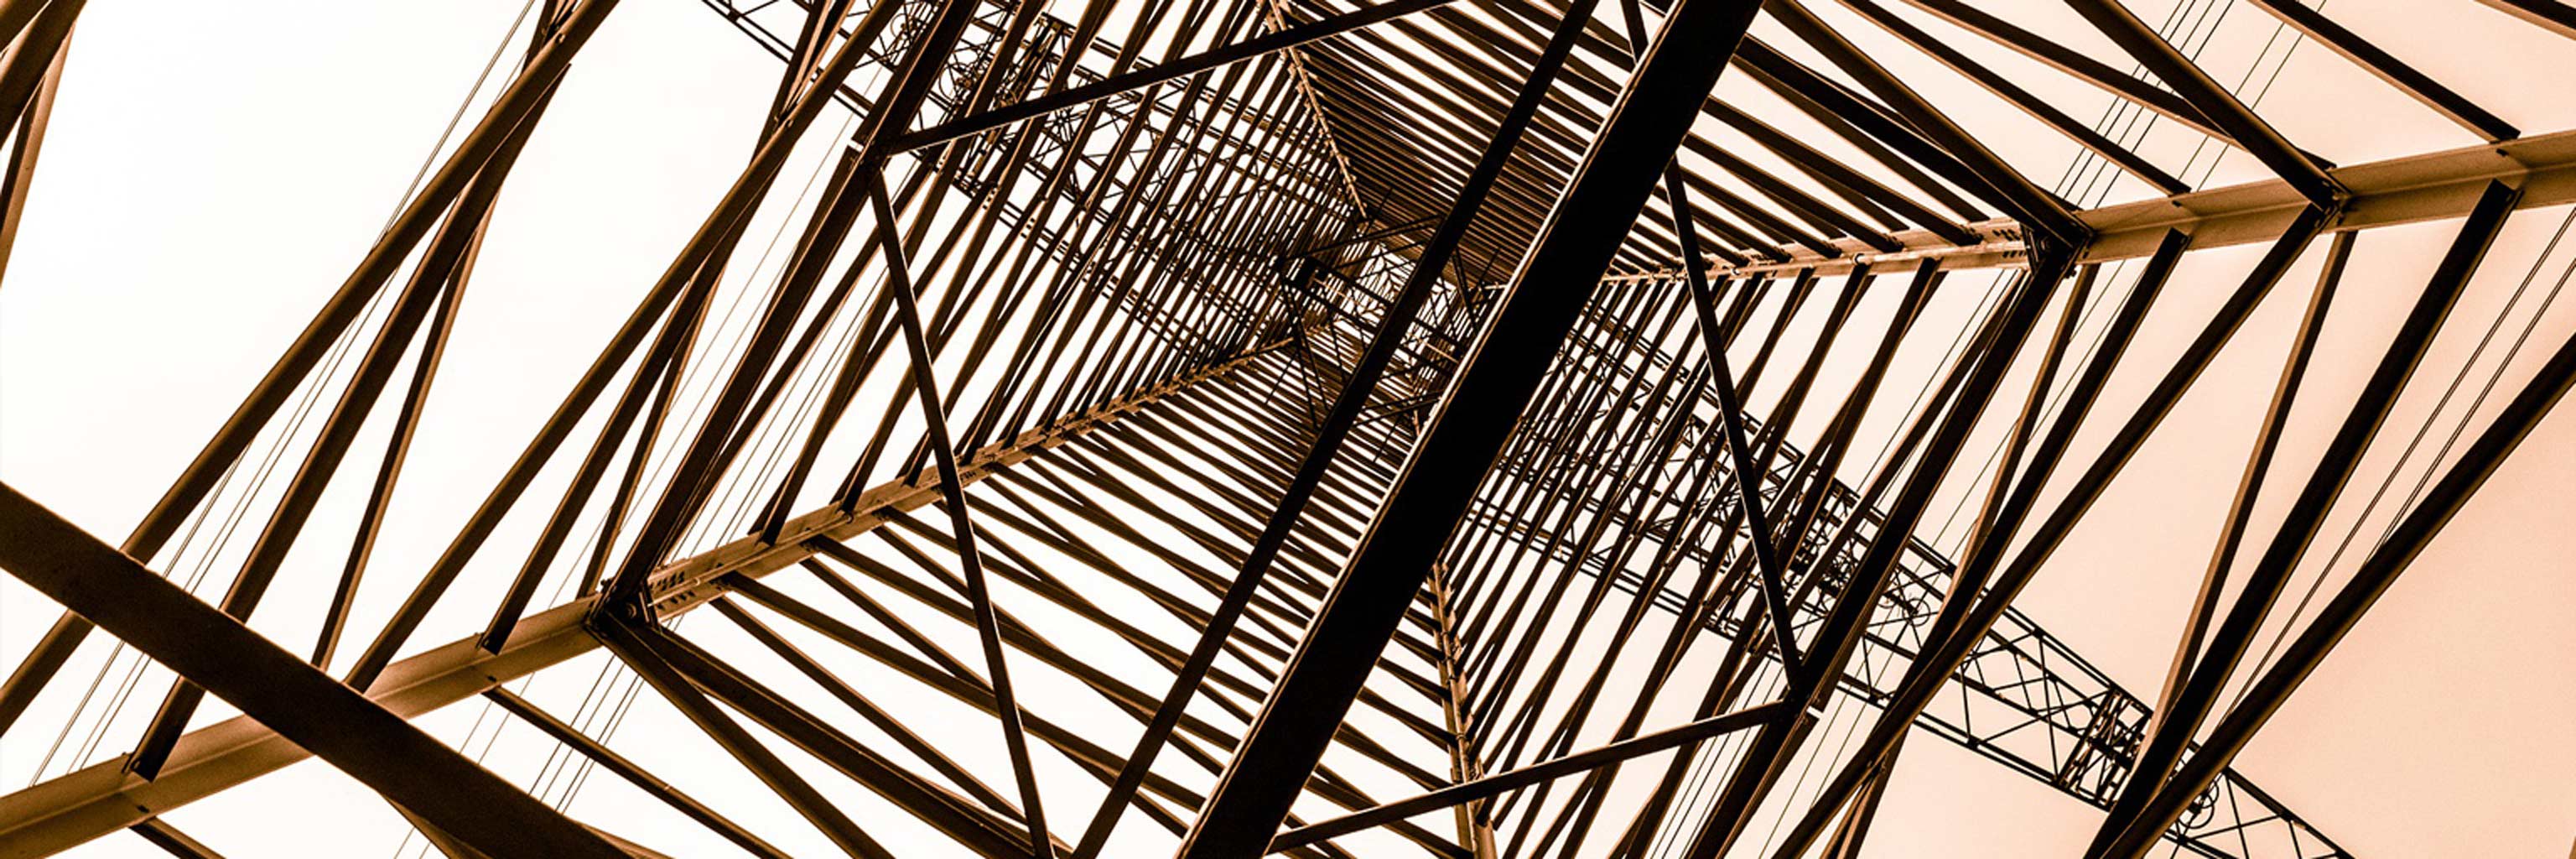 looking up a radio tower